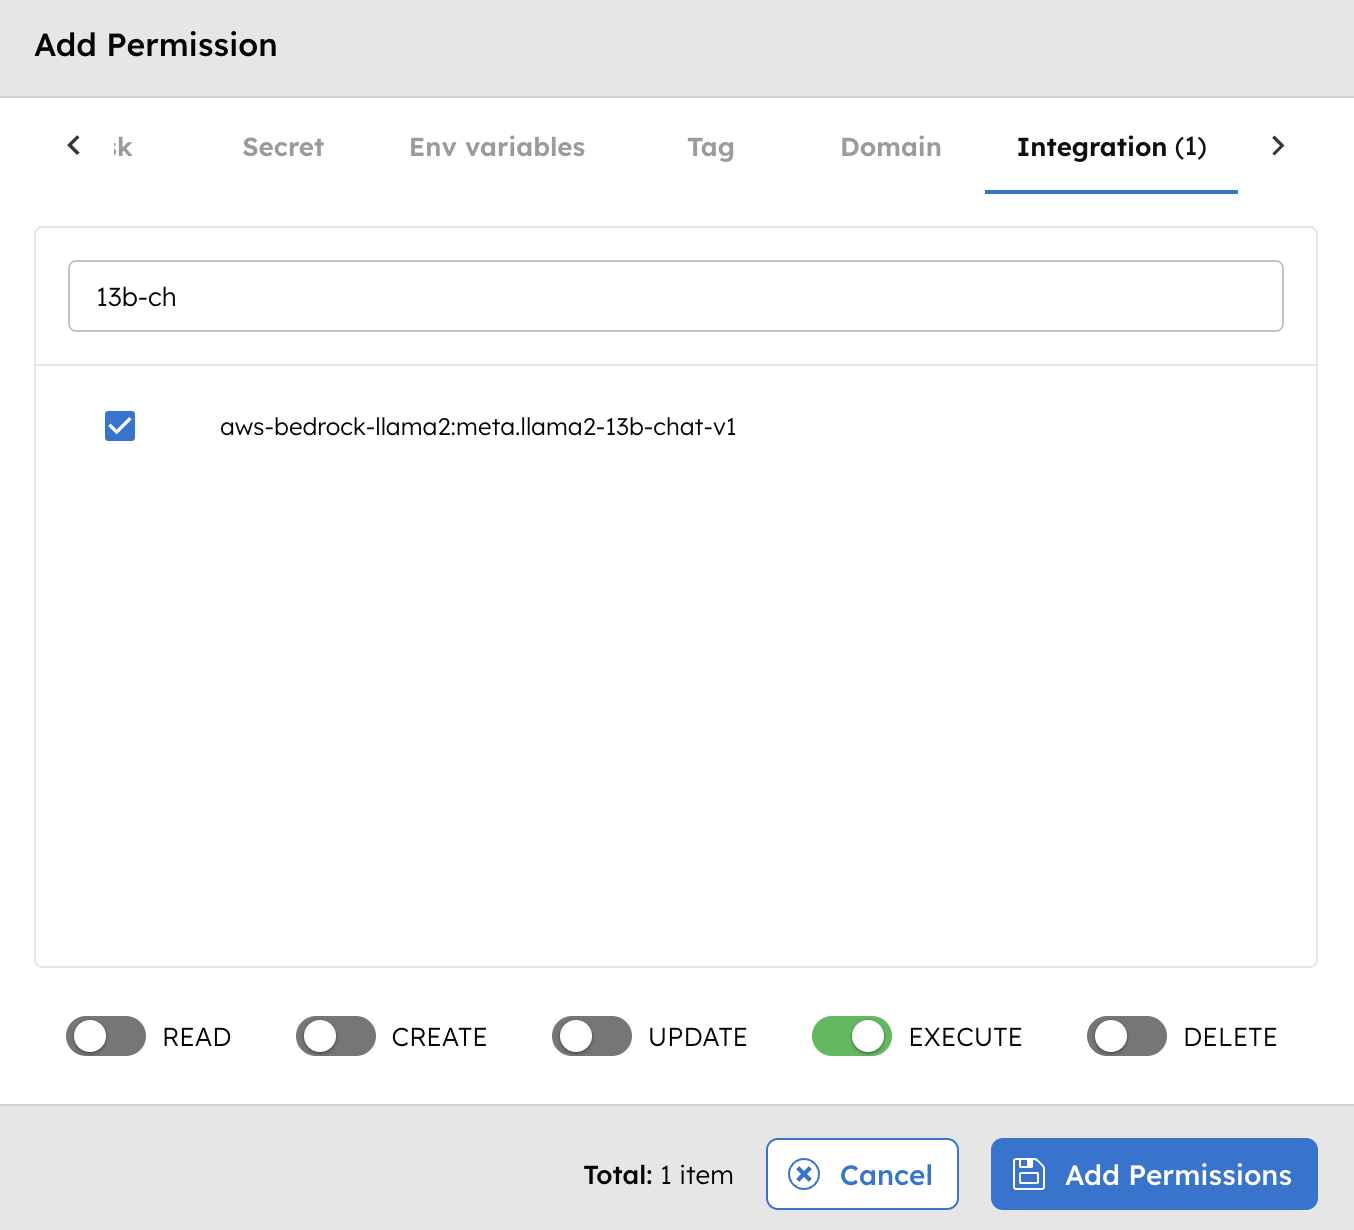 Add Permissions for Integrations